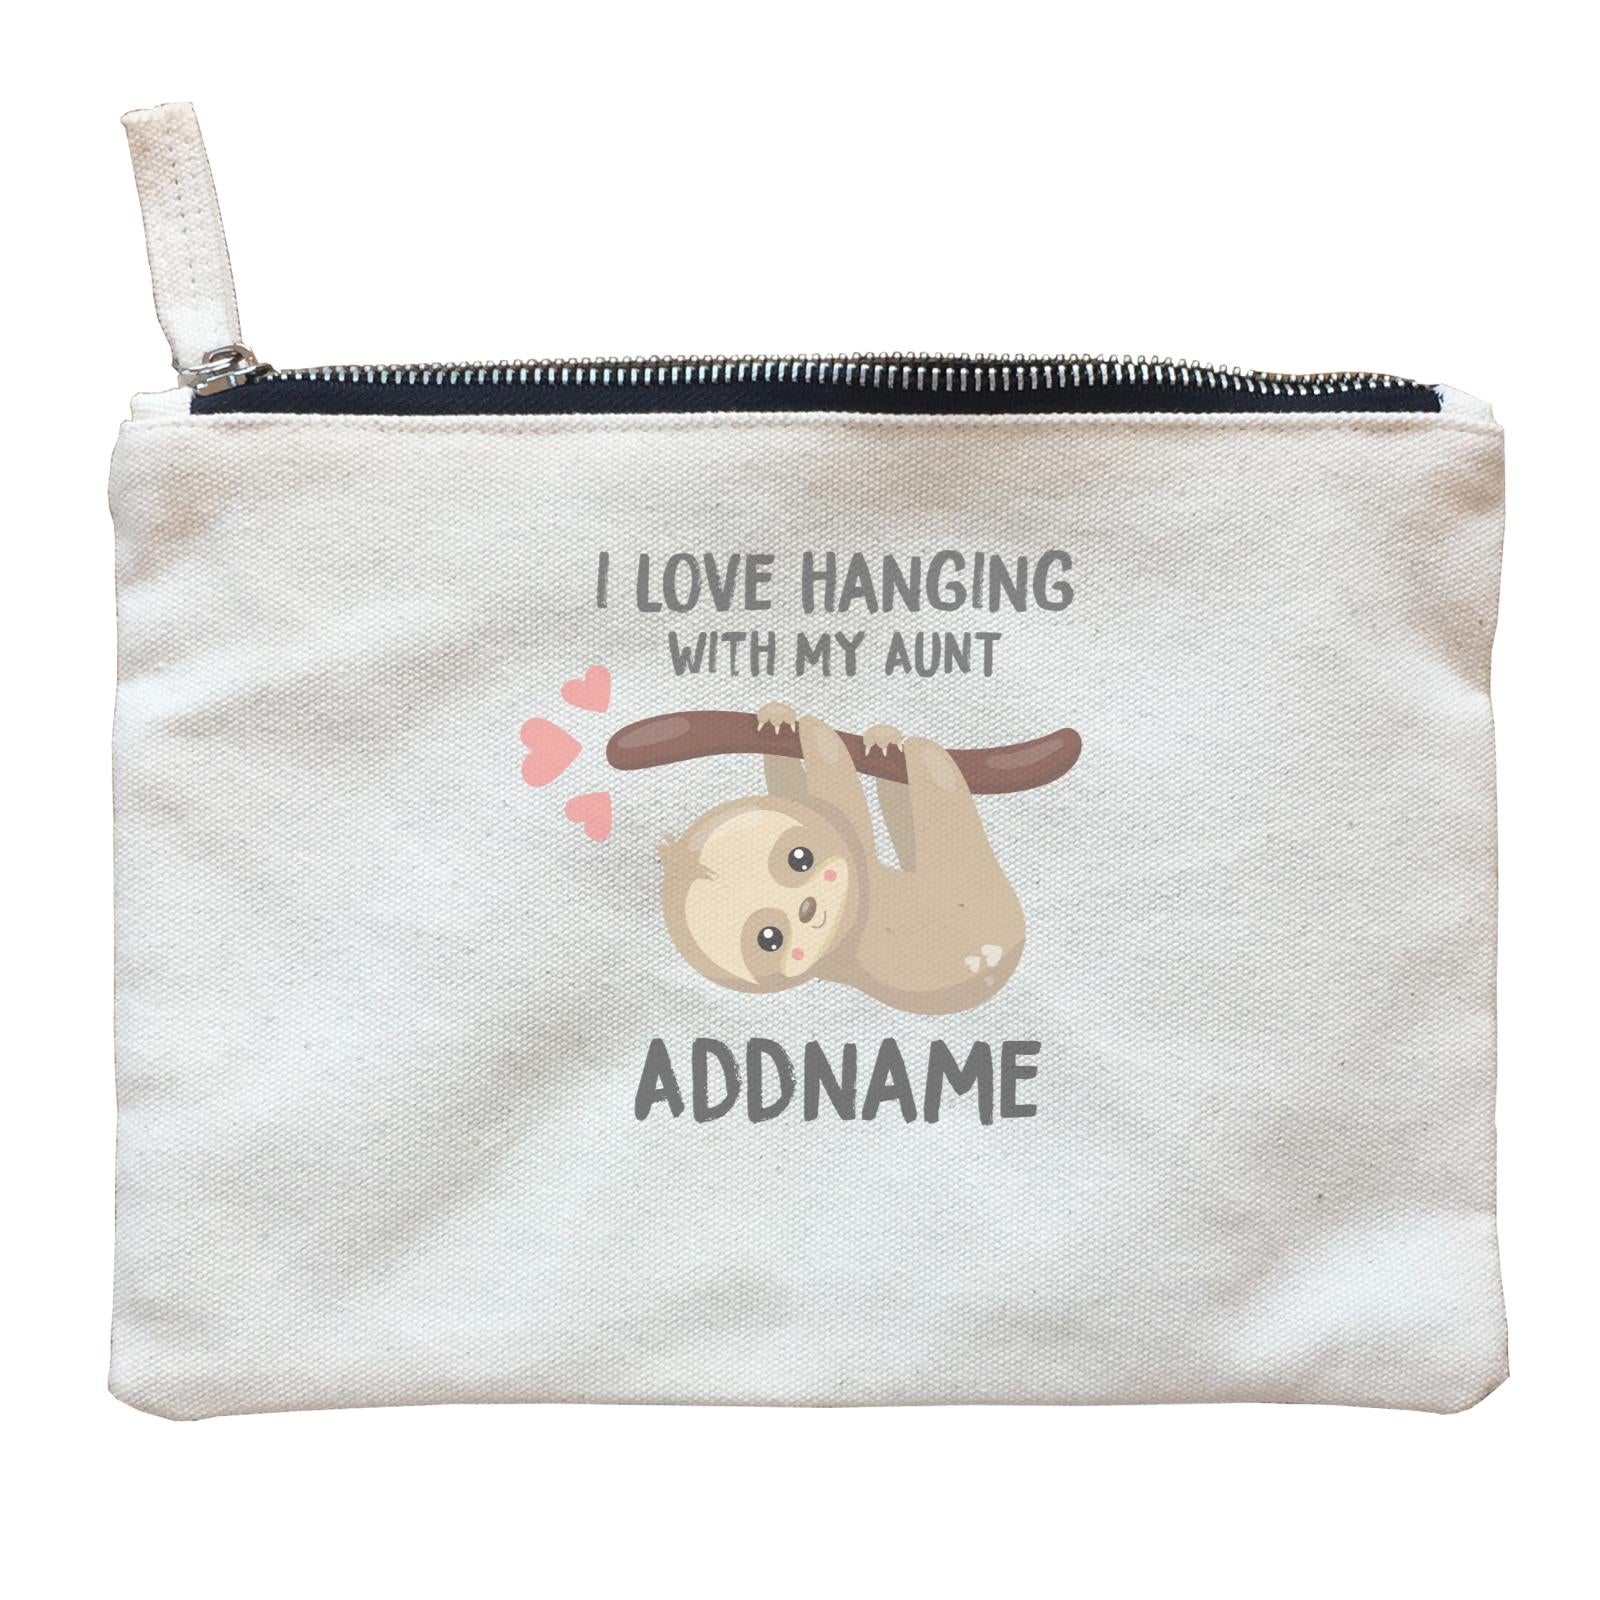 Cute Sloth I Love Hanging With My Aunt Addname Zipper Pouch